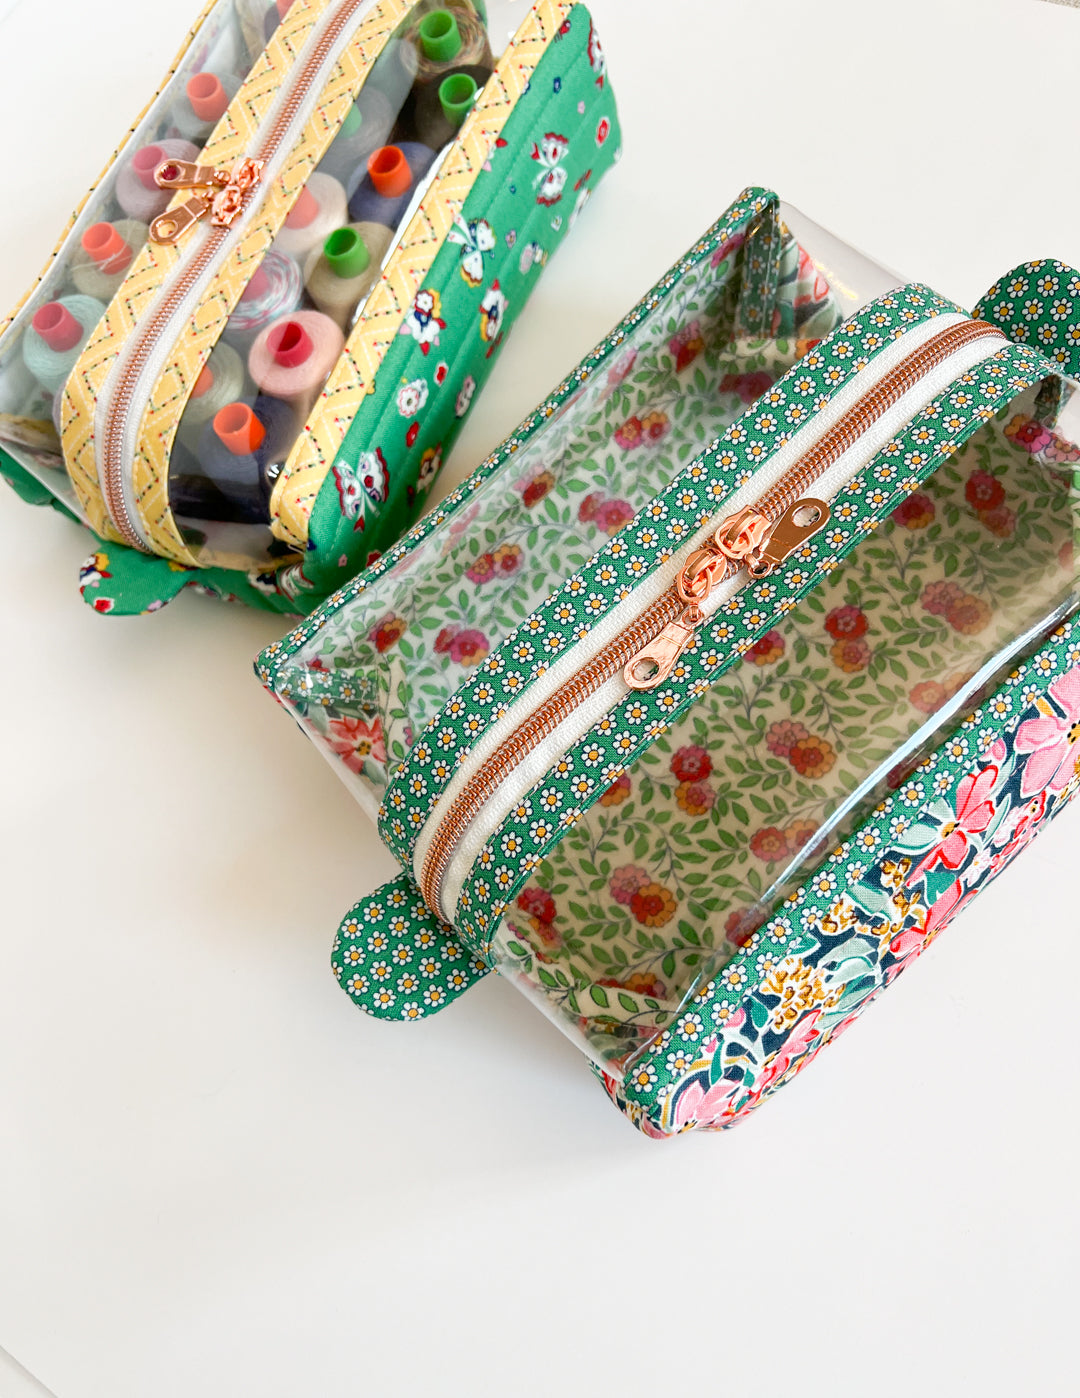 Free Bag Patterns: Carnaby Carry All Bag